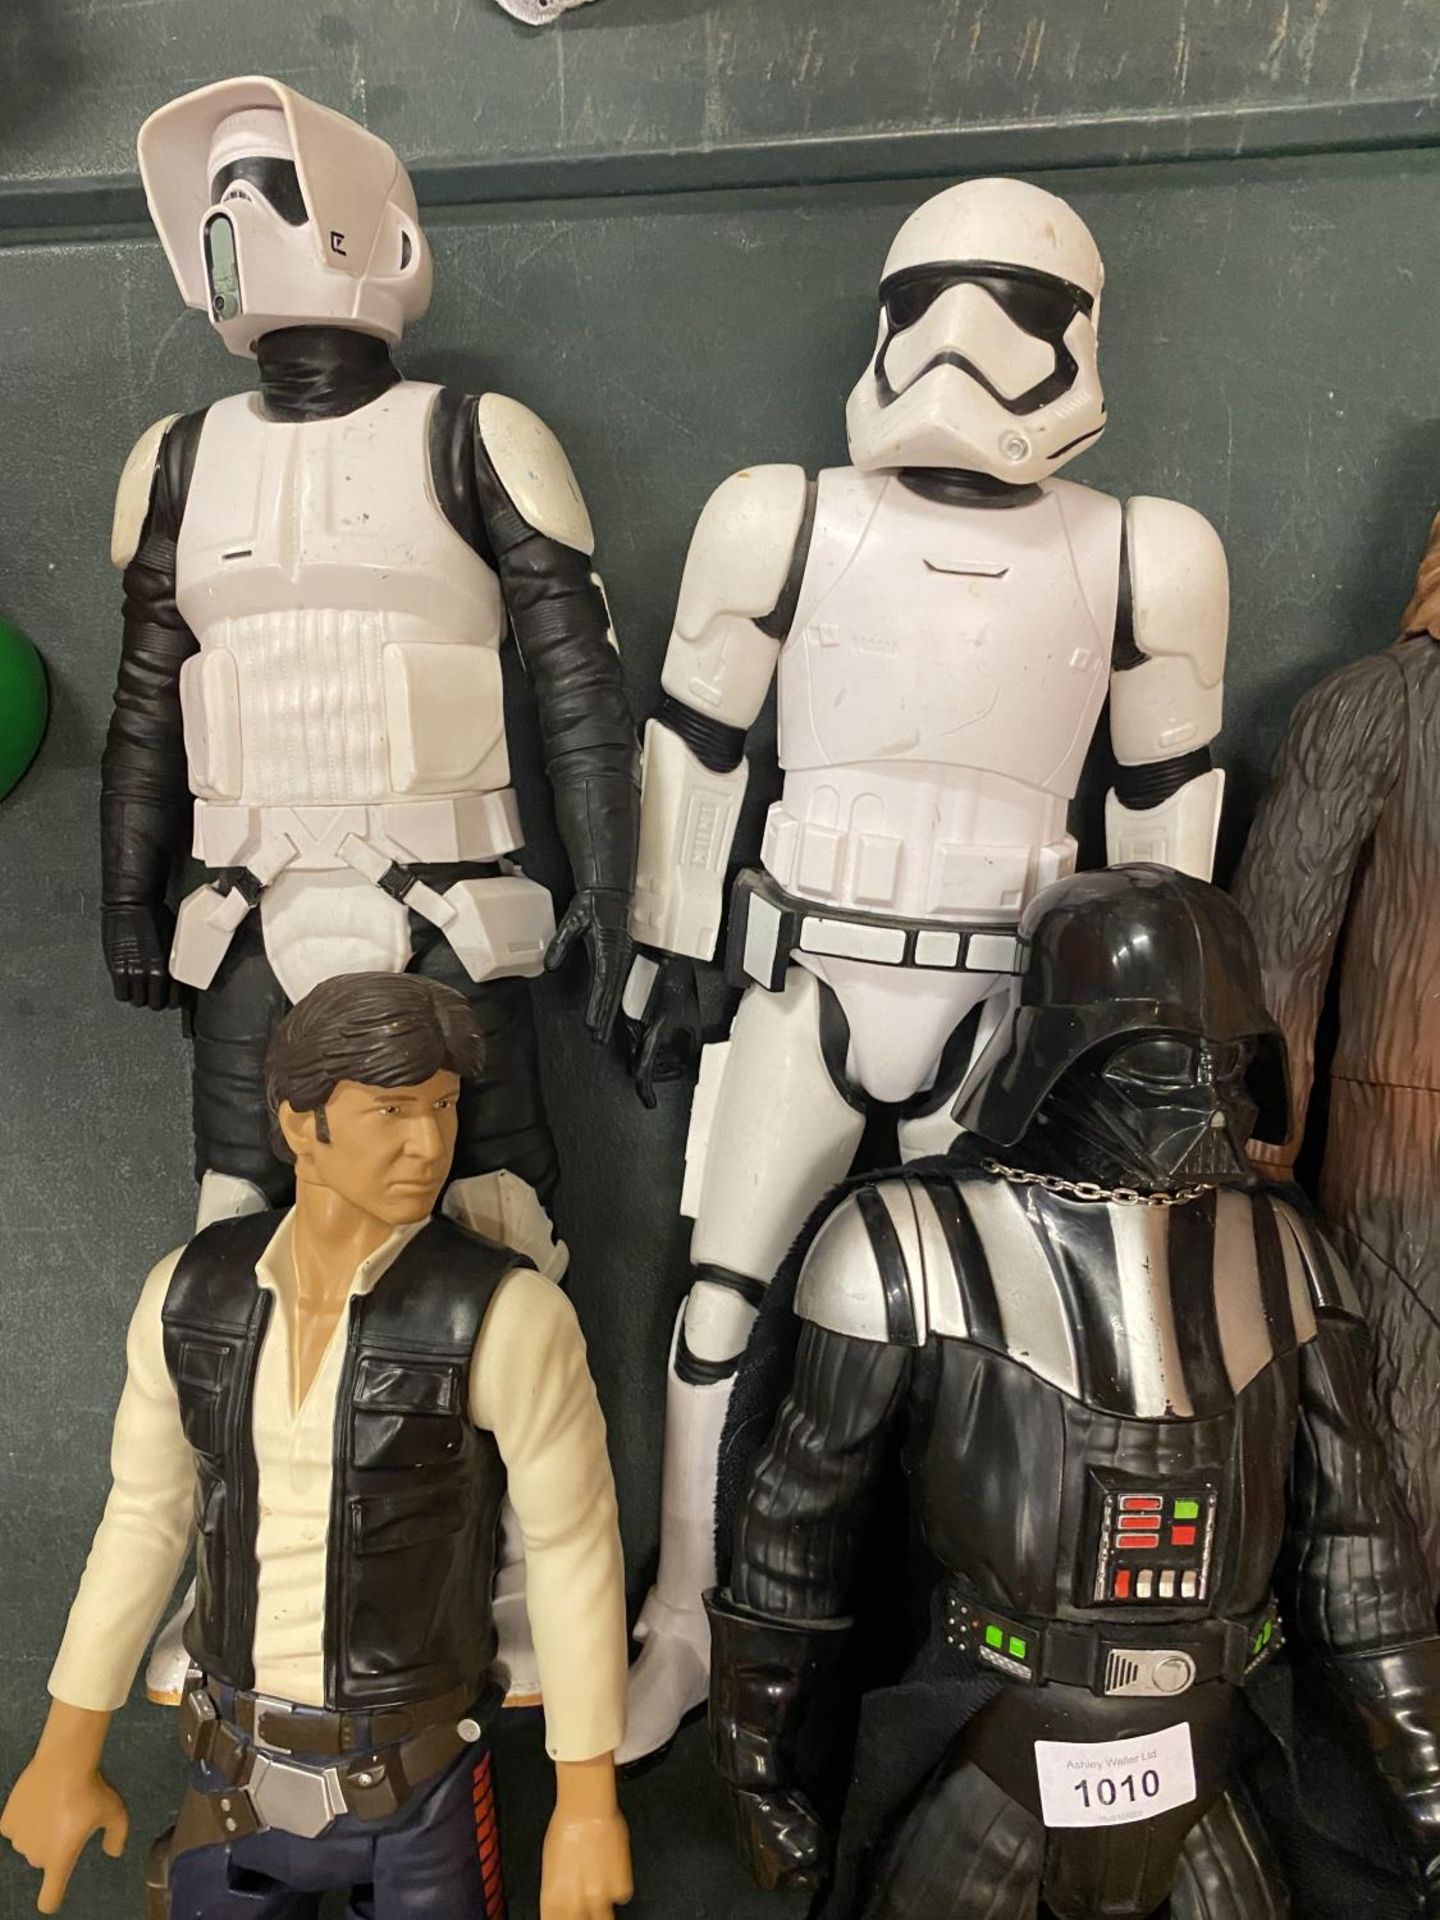 FIVE LARGE STAR WARS FIGURES TO INCLUDE, DARTH VADER, CHEWBACCA, STORM TROOPERS, ETC - Image 3 of 3